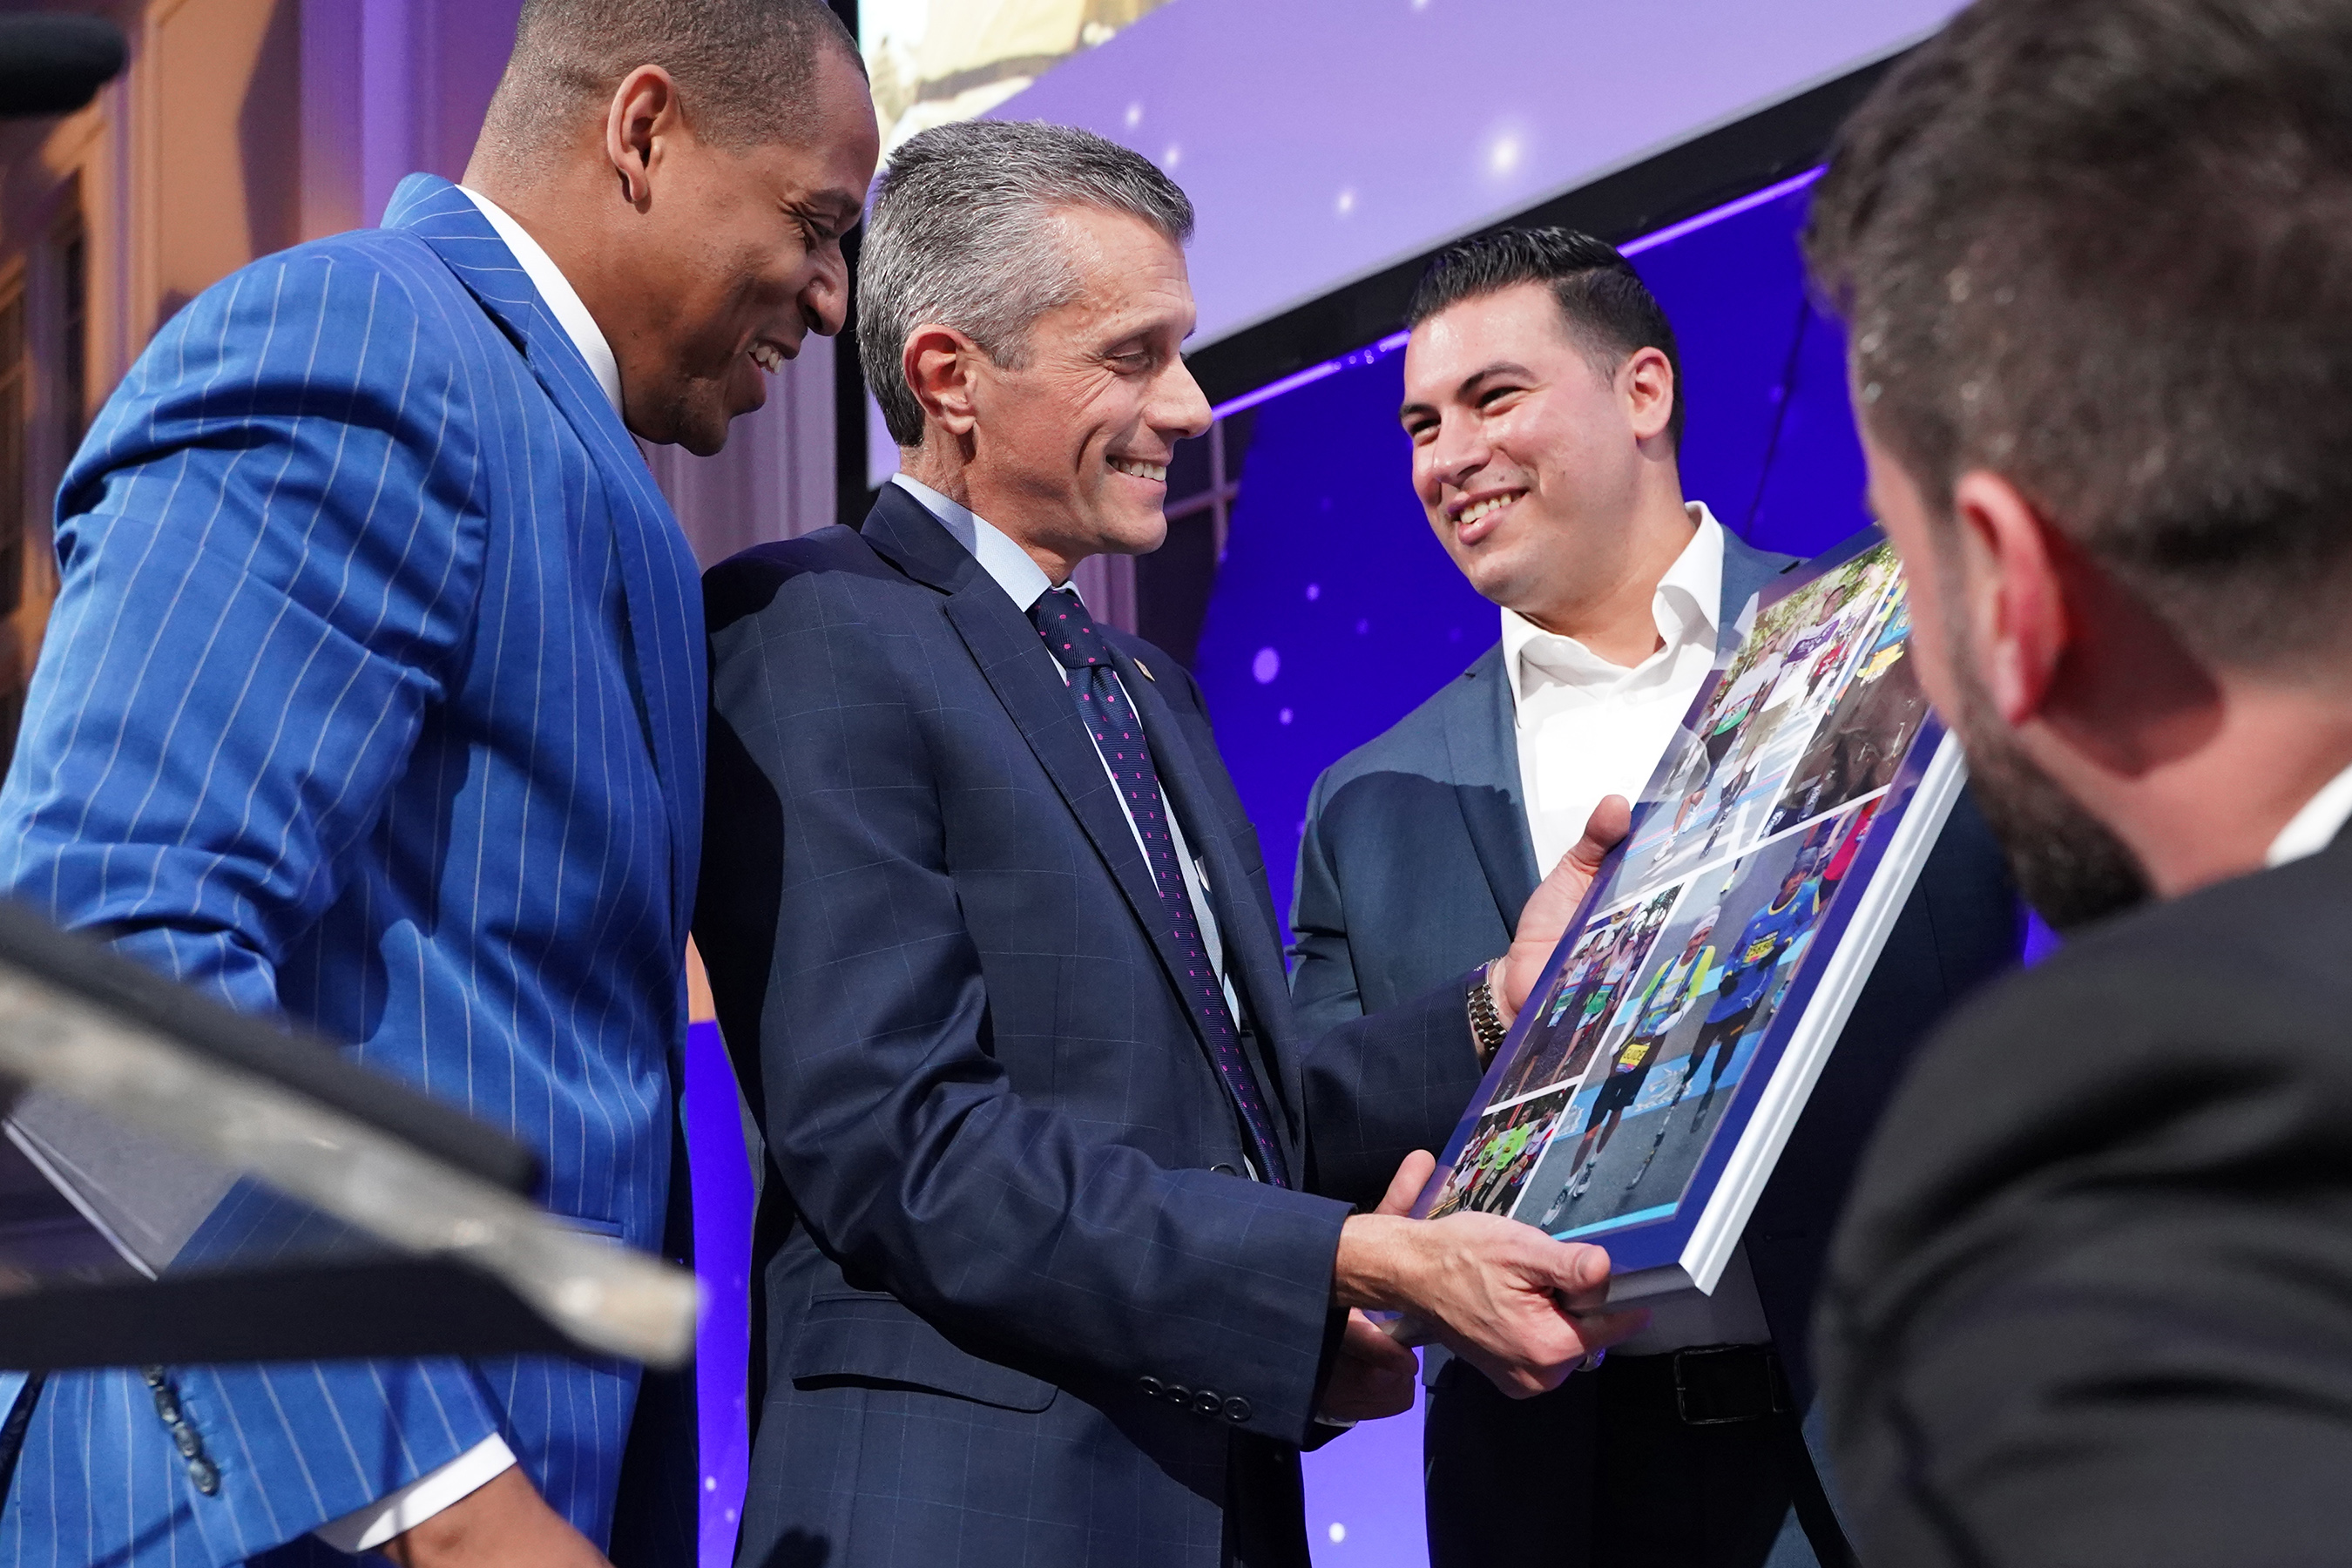 Achilles International Freedom Team members, Cedric King, Stefan LeRoy and Matias Ferreira, present the Volunteer of the Year award to David Cordani, President and CEO of Cigna.